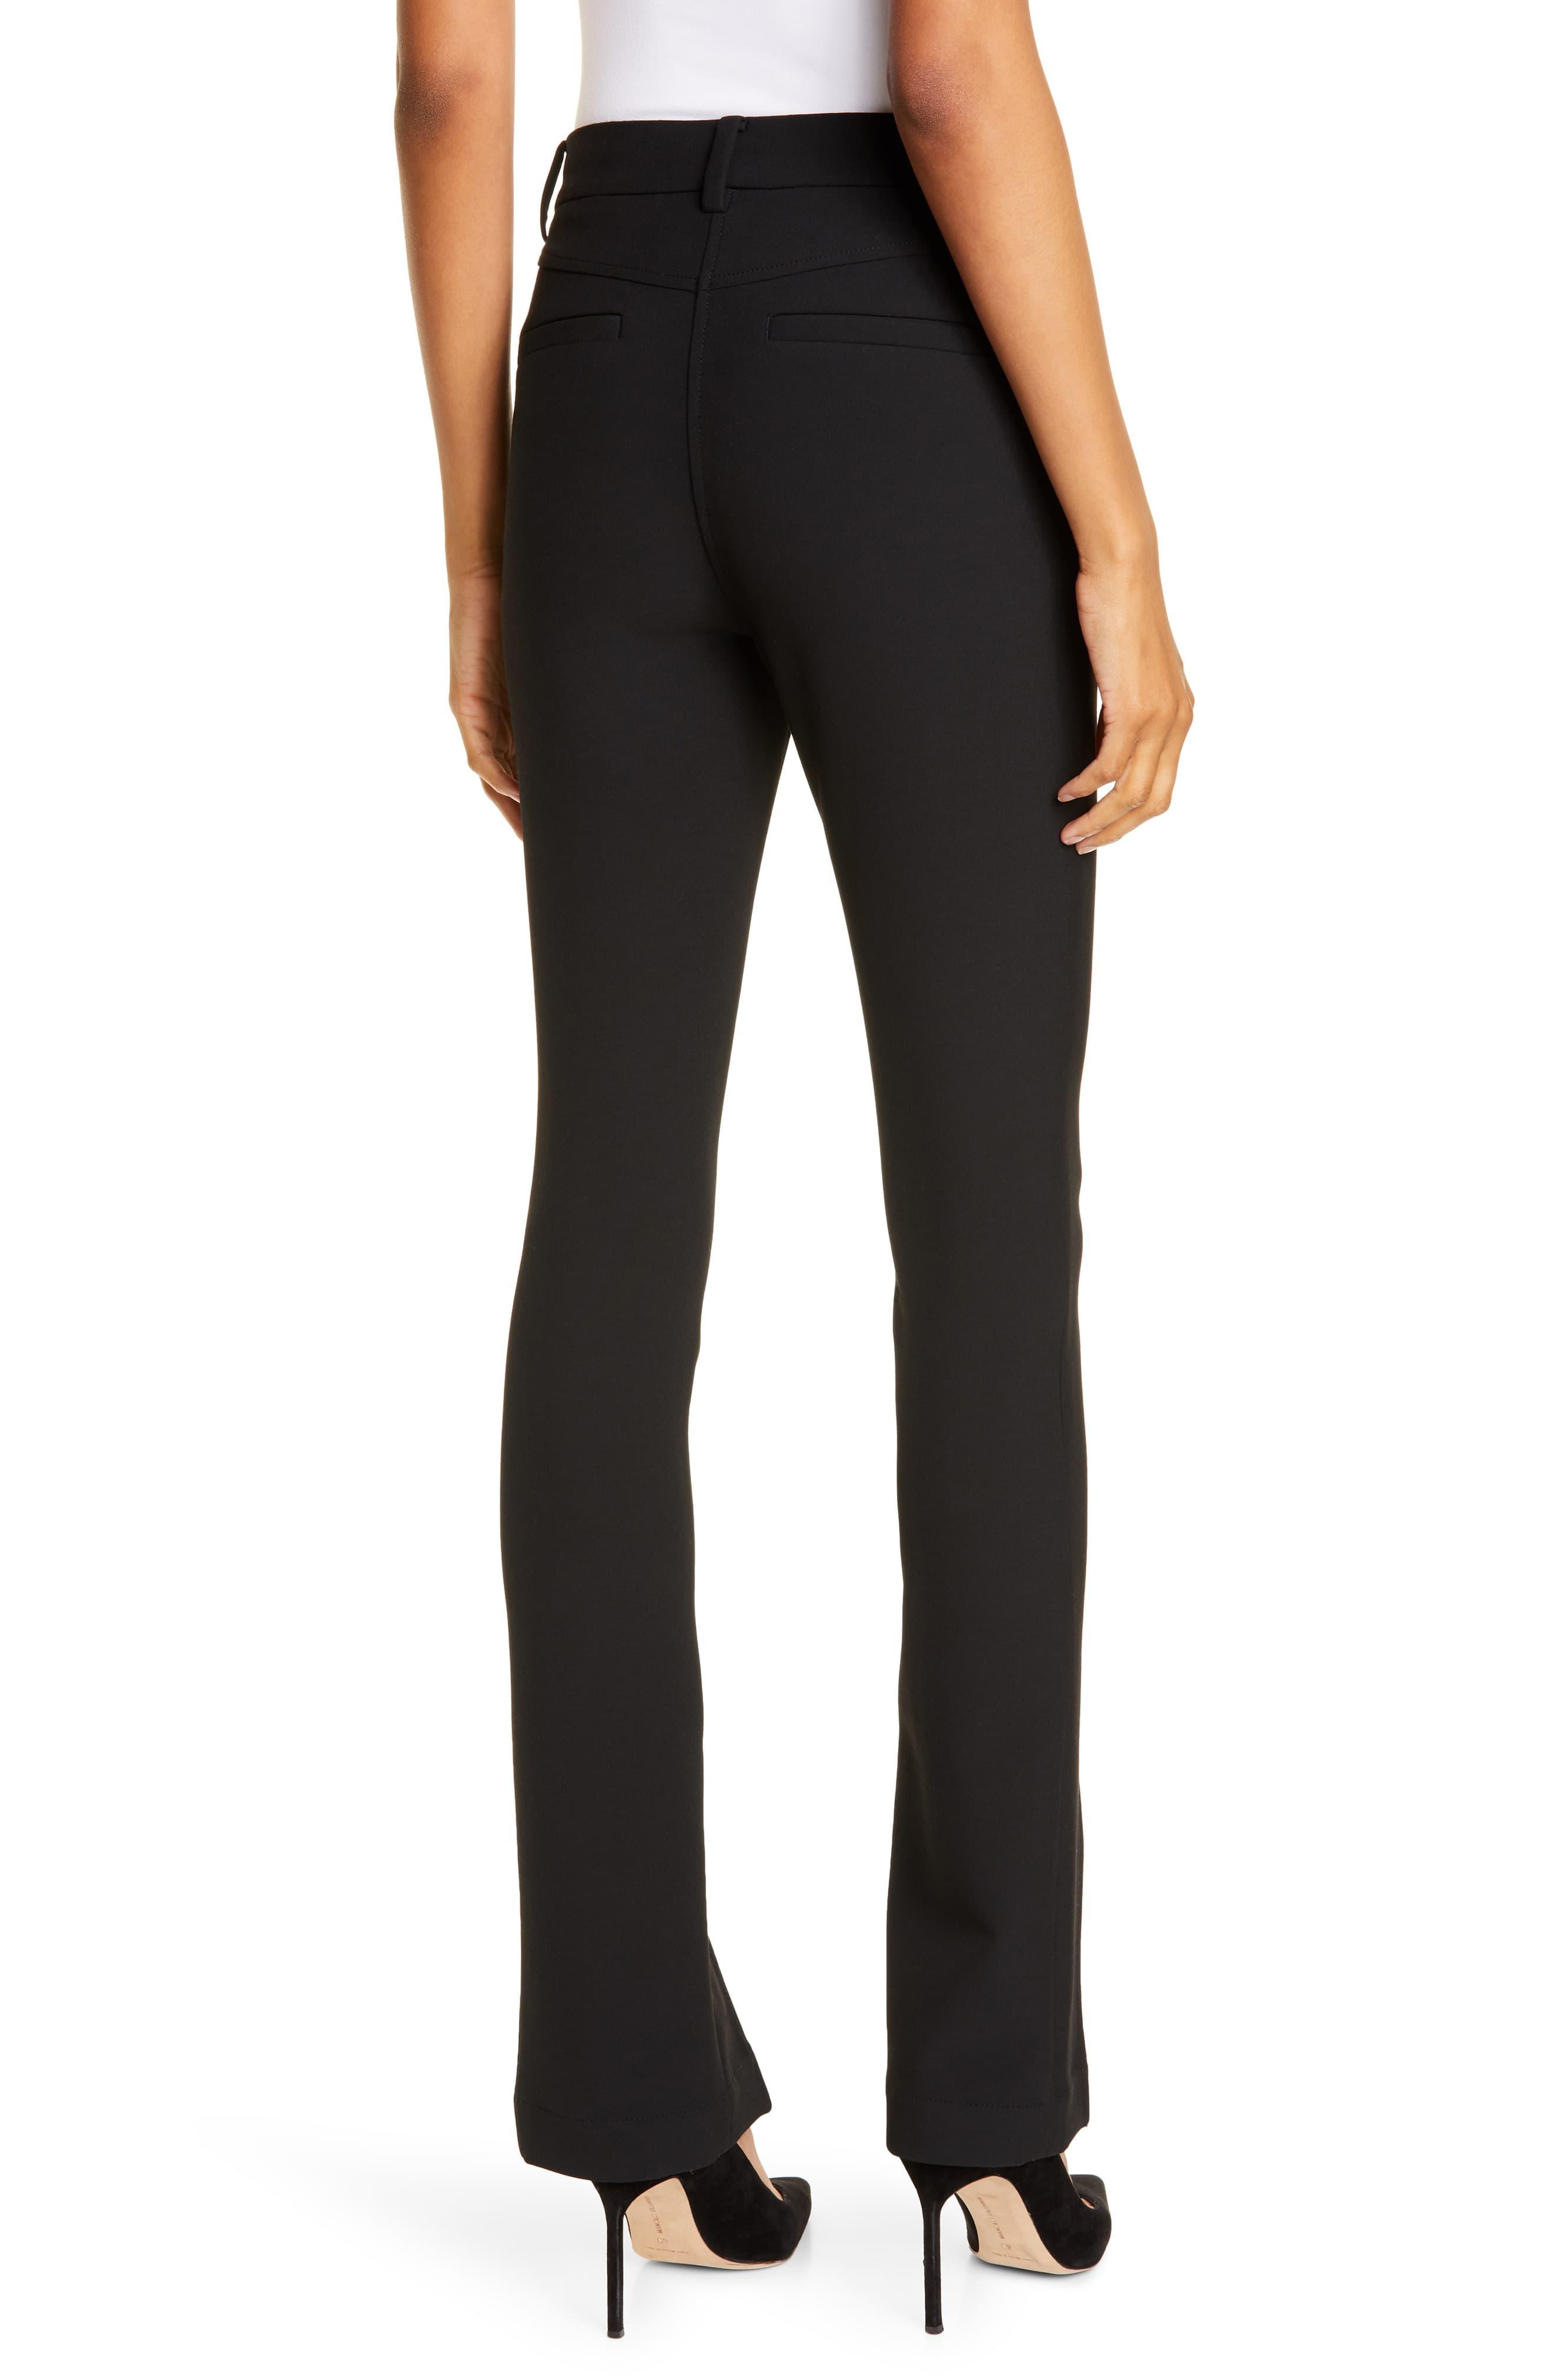 A.L.C. Conway Front Slit Pants in Black - Lyst